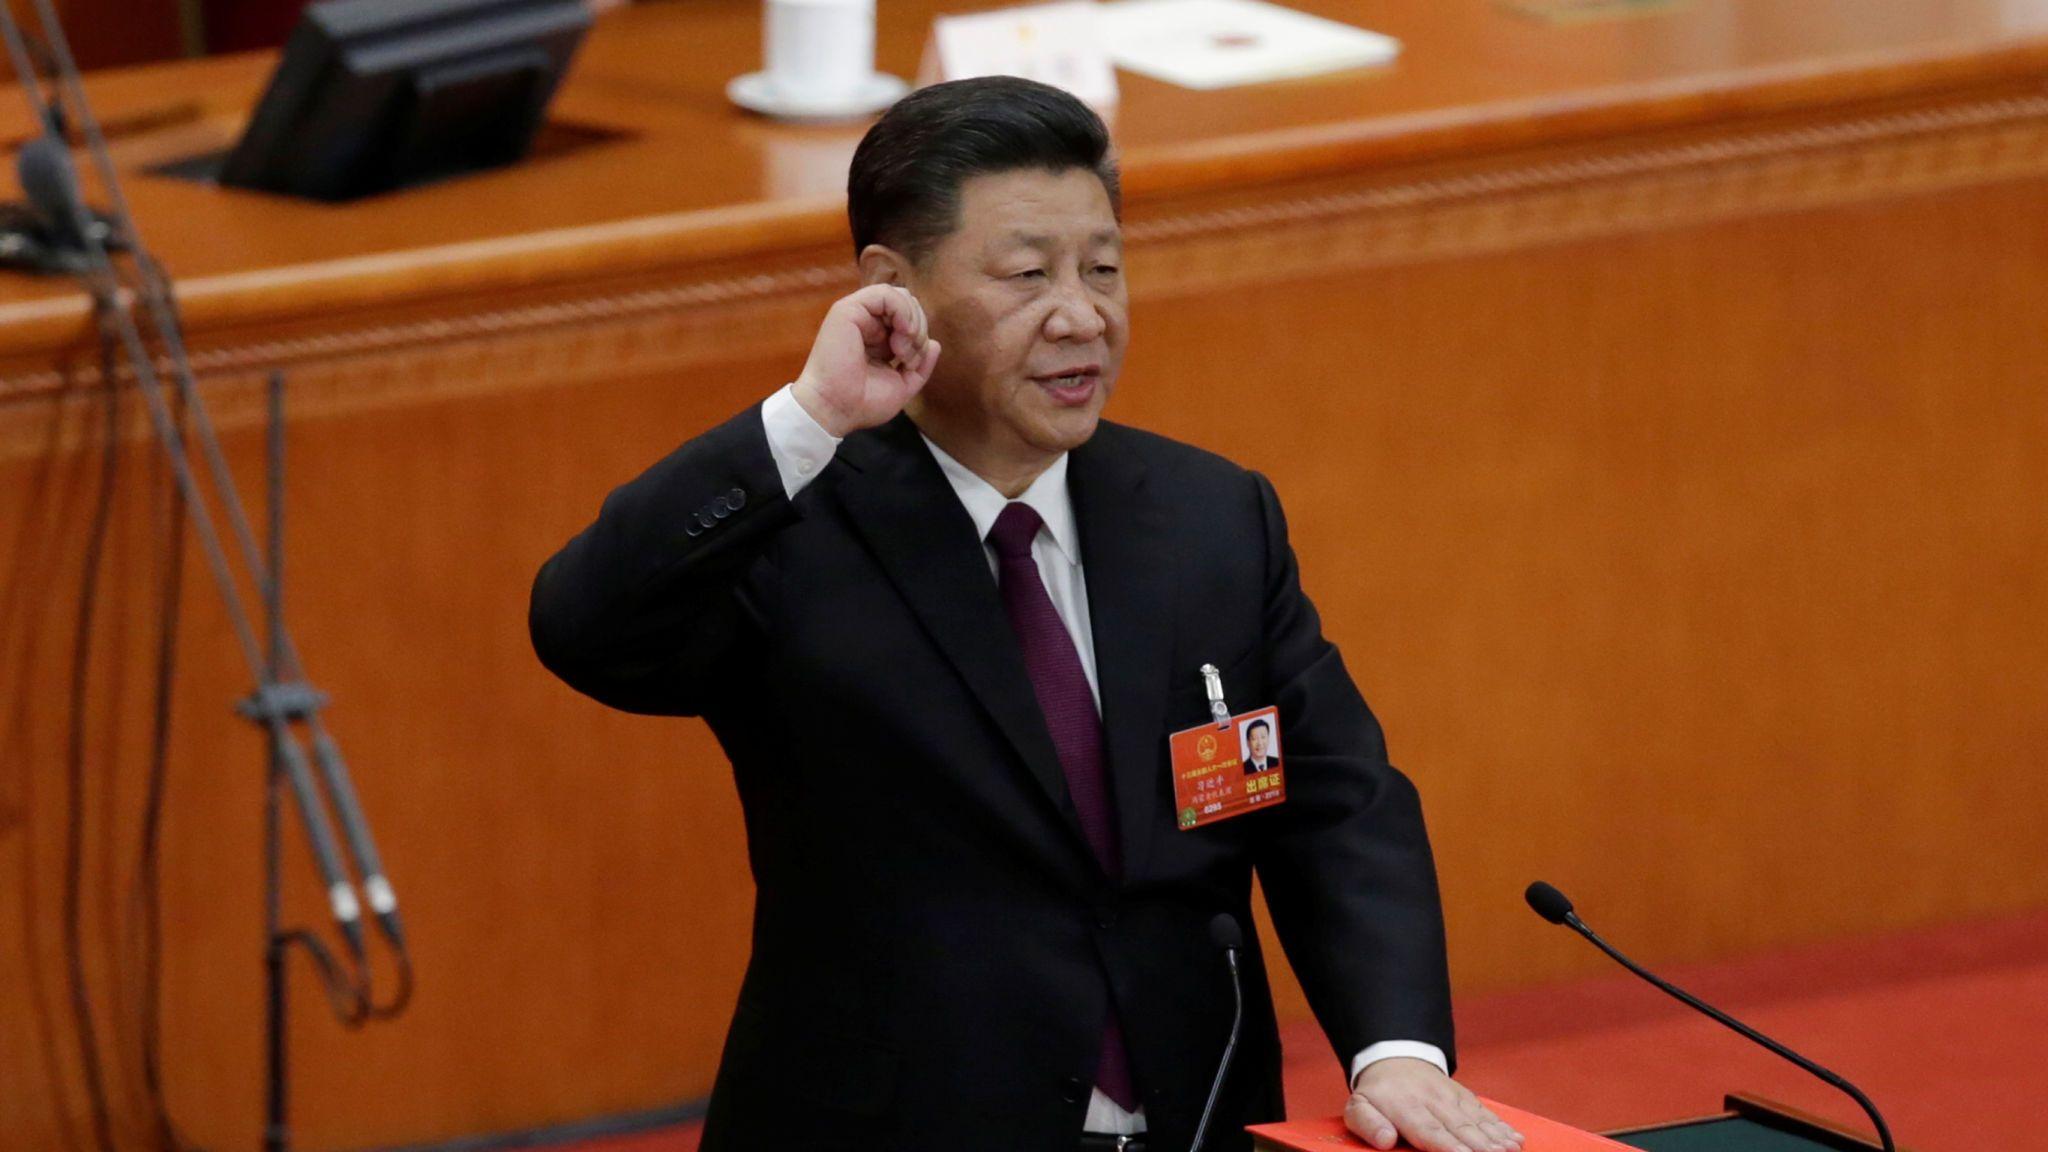 China's President Xi Jinping reappointed with no term limits